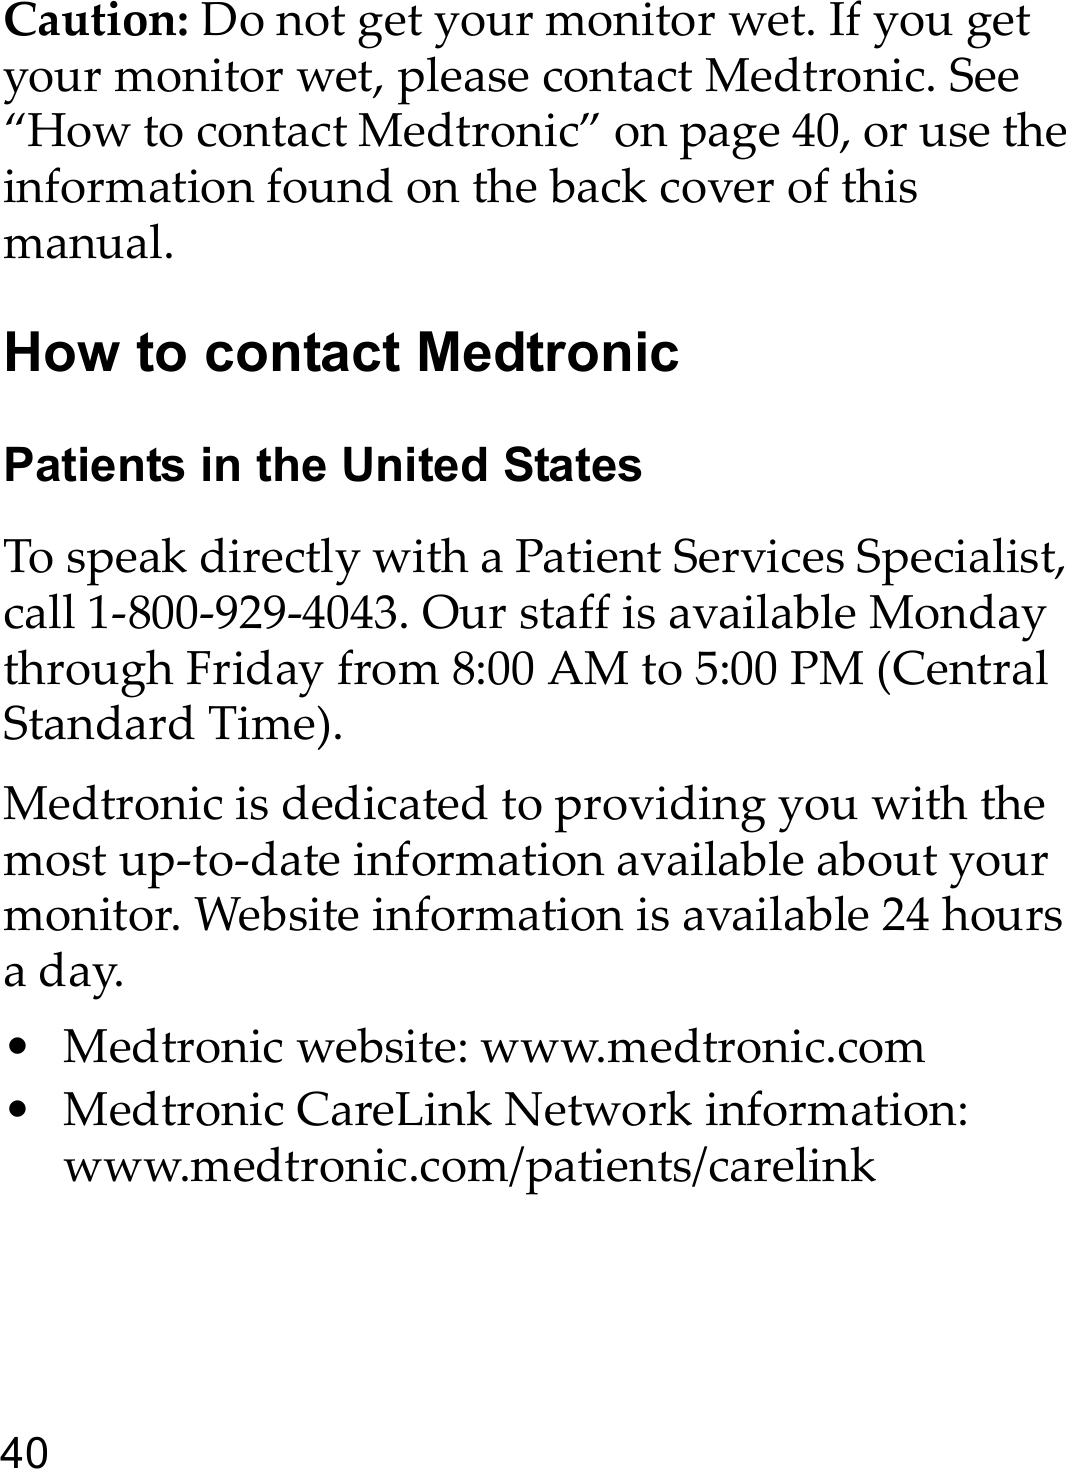 40Caution: Do not get your monitor wet. If you get your monitor wet, please contact Medtronic. See “How to contact Medtronic” on page 40, or use the information found on the back cover of this manual.How to contact MedtronicPatients in the United StatesTo speak directly with a Patient Services Specialist, call 1-800-929-4043. Our staff is available Monday through Friday from 8:00 AM to 5:00 PM (Central Standard Time). Medtronic is dedicated to providing you with the most up-to-date information available about your monitor. Website information is available 24 hours a day.• Medtronic website: www.medtronic.com • Medtronic CareLink Network information: www.medtronic.com/patients/carelink